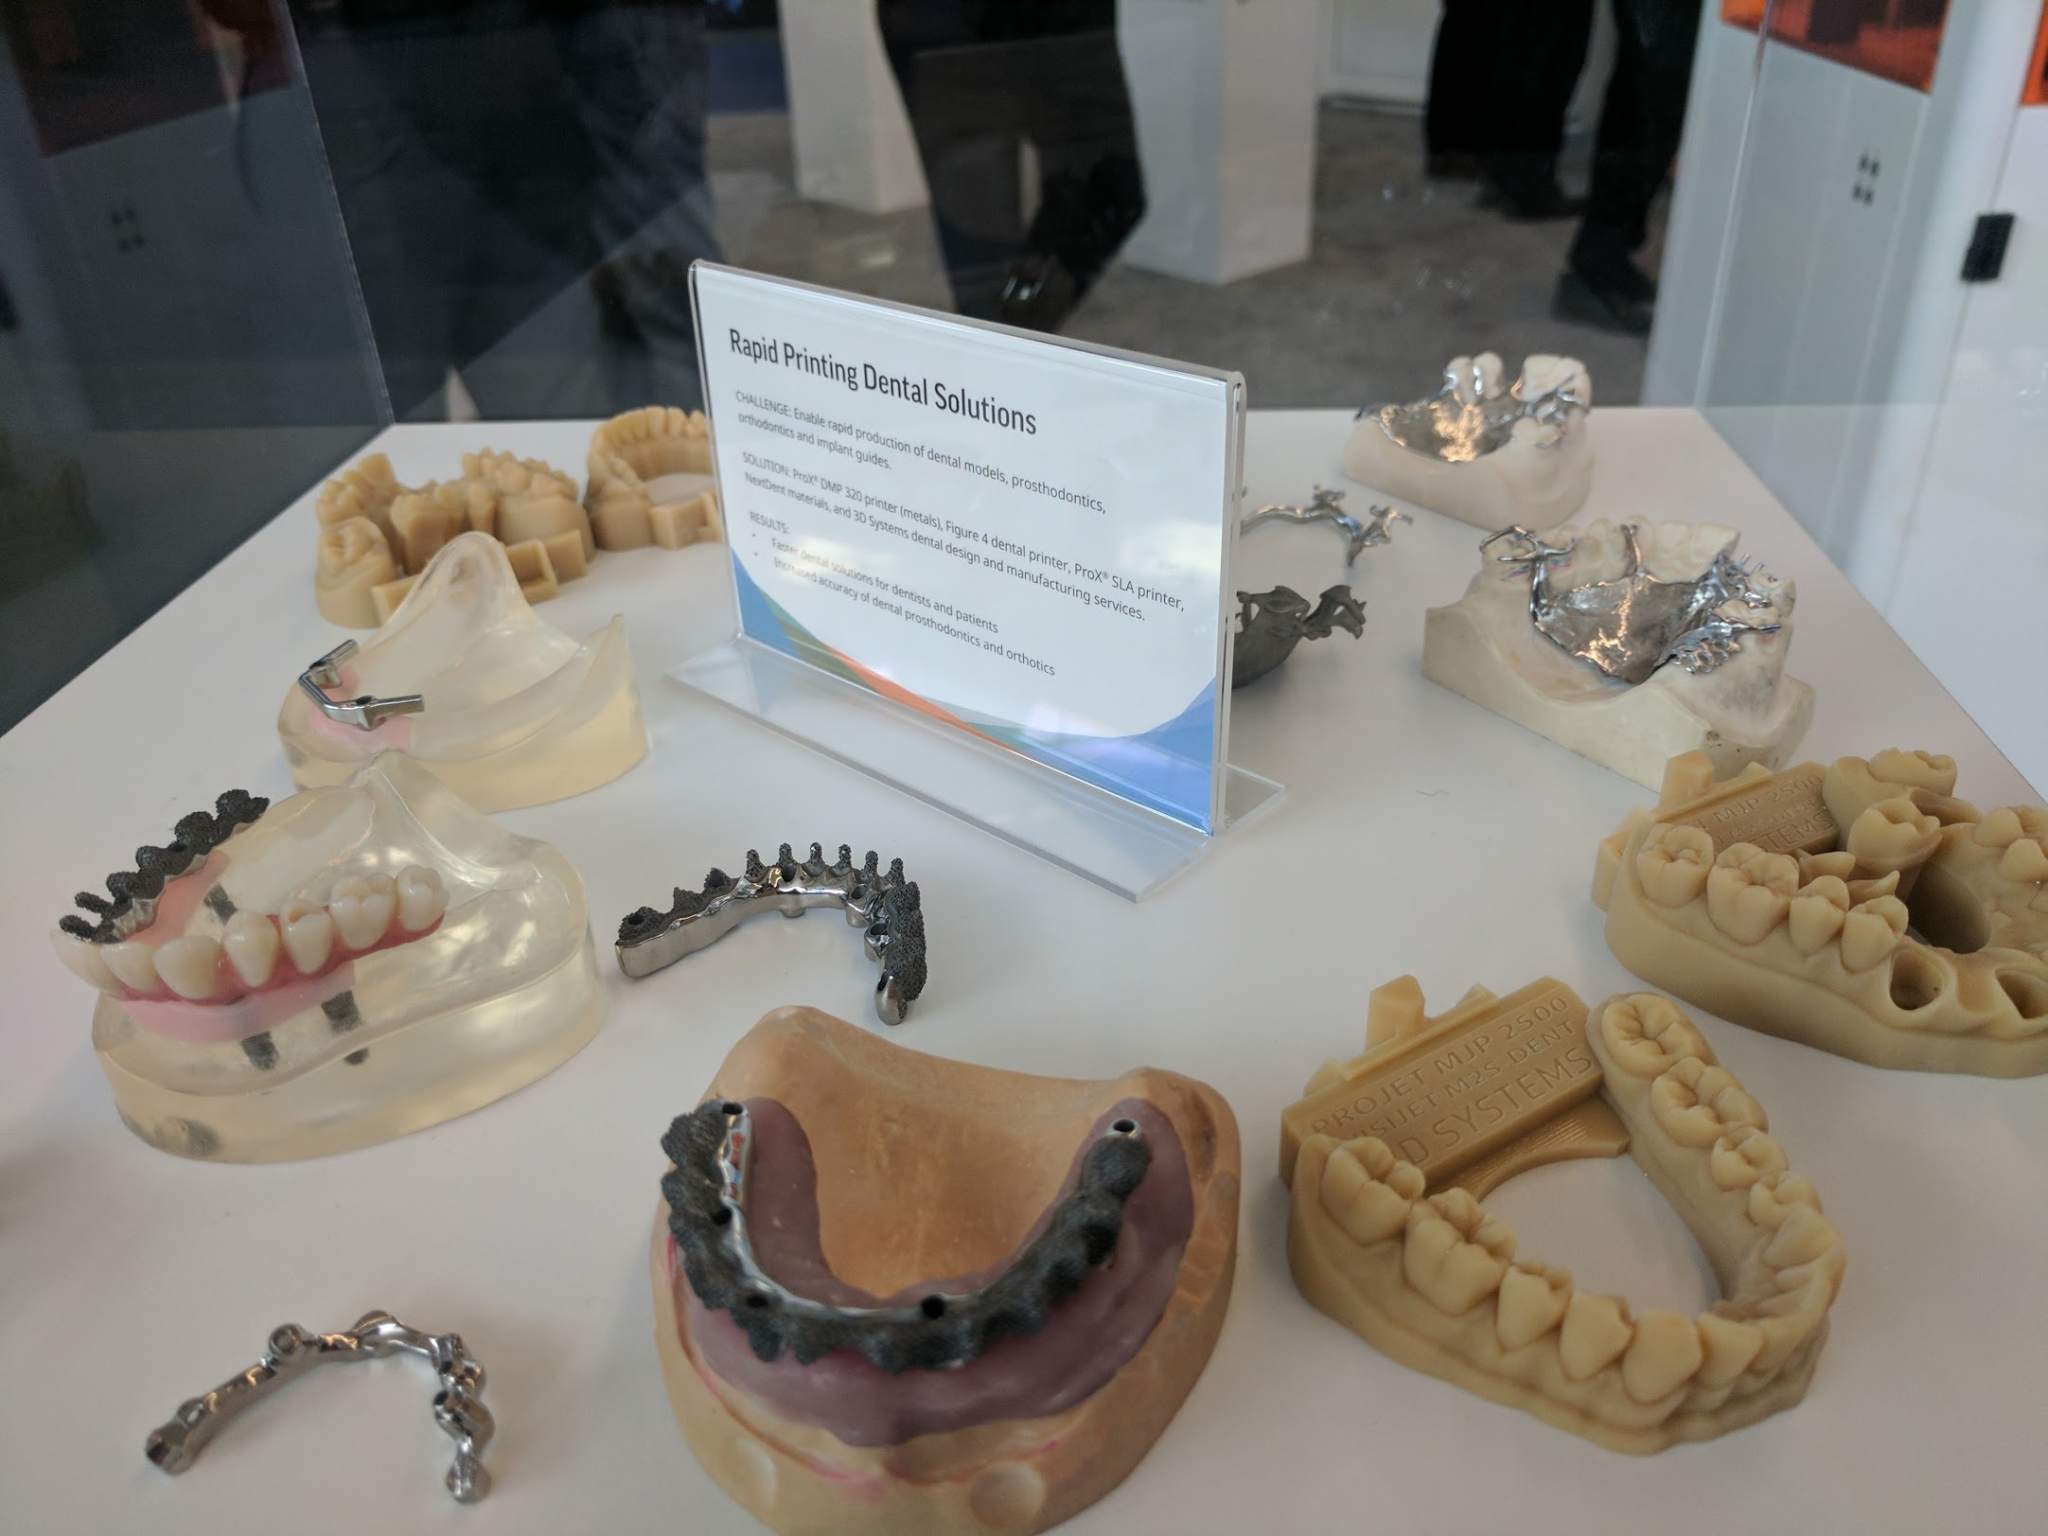 3D Systems Rapid Printing Dental Solutions. Photo by Michael Petch.